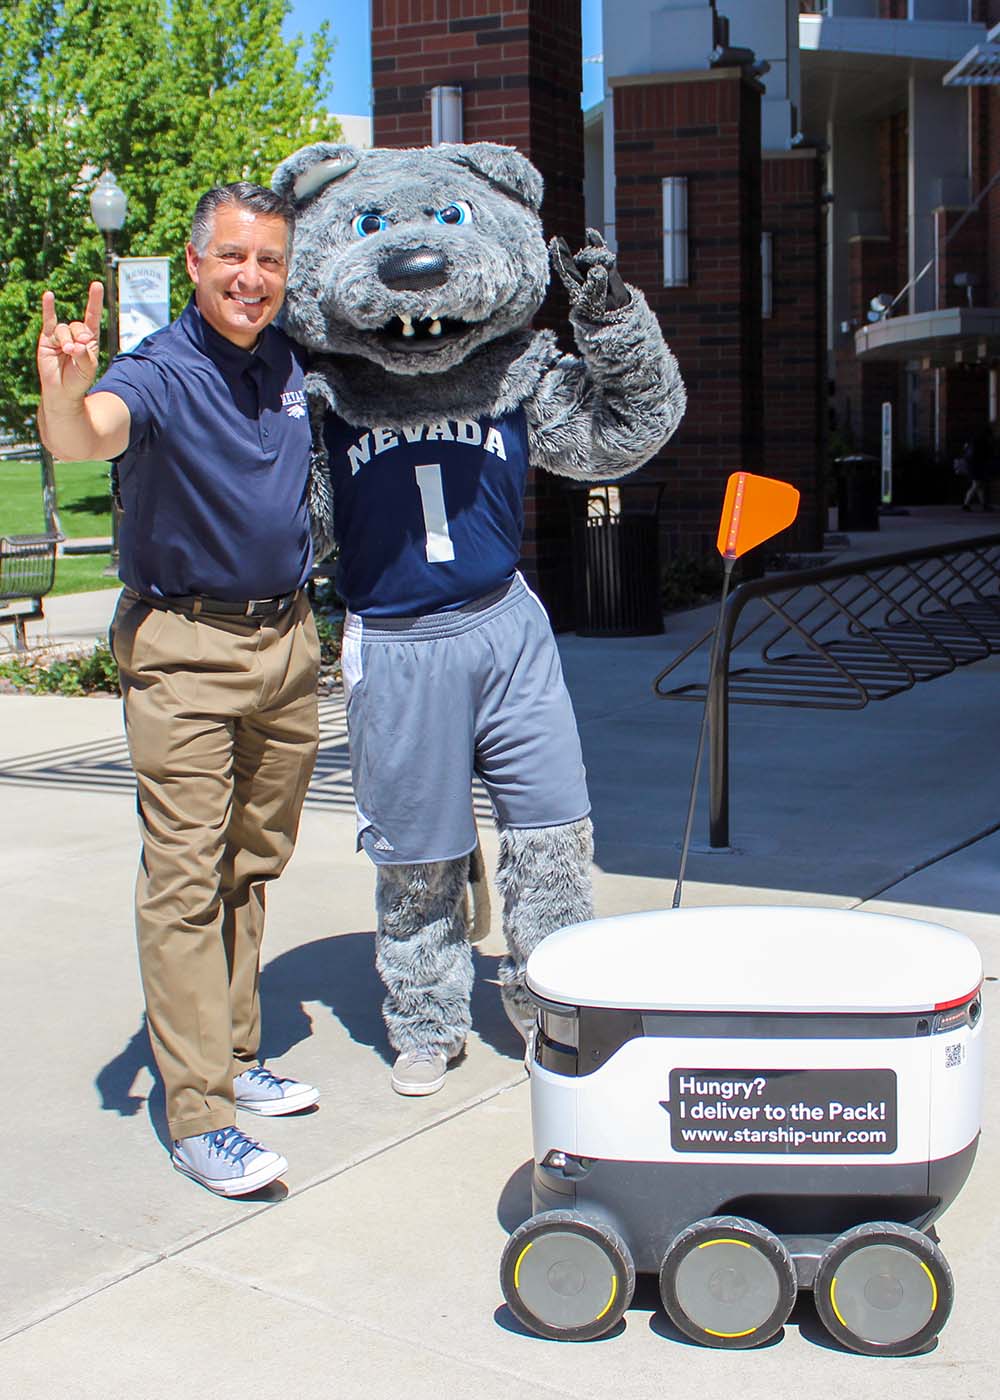 University of Nevada, Reno President Brian Sandoval with mascot Wolfie and a Starship food delivery robot.